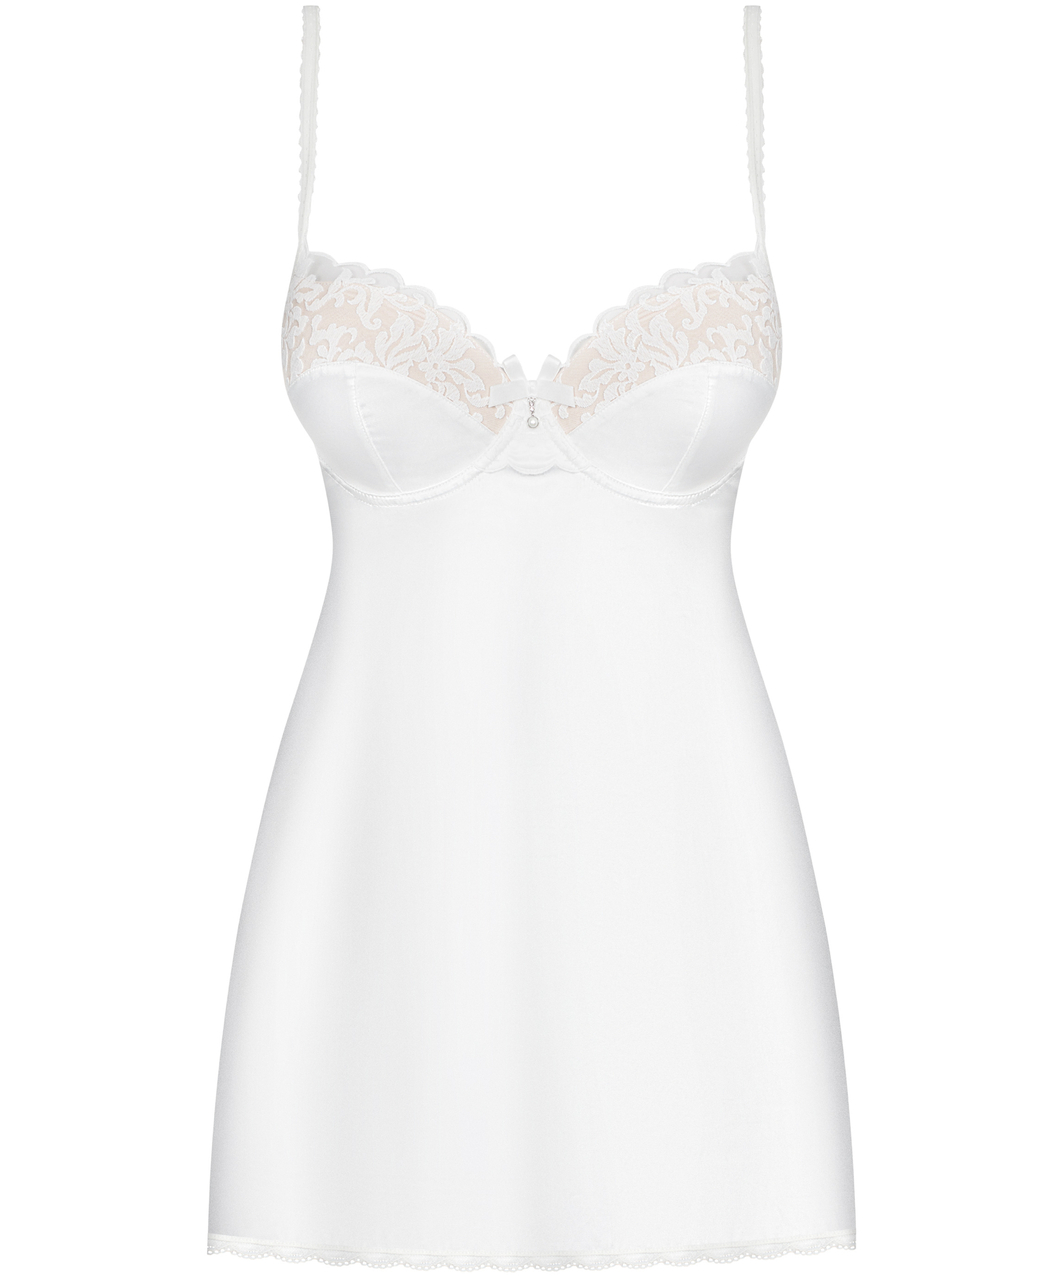 Obsessive white satin chemise with padded cups